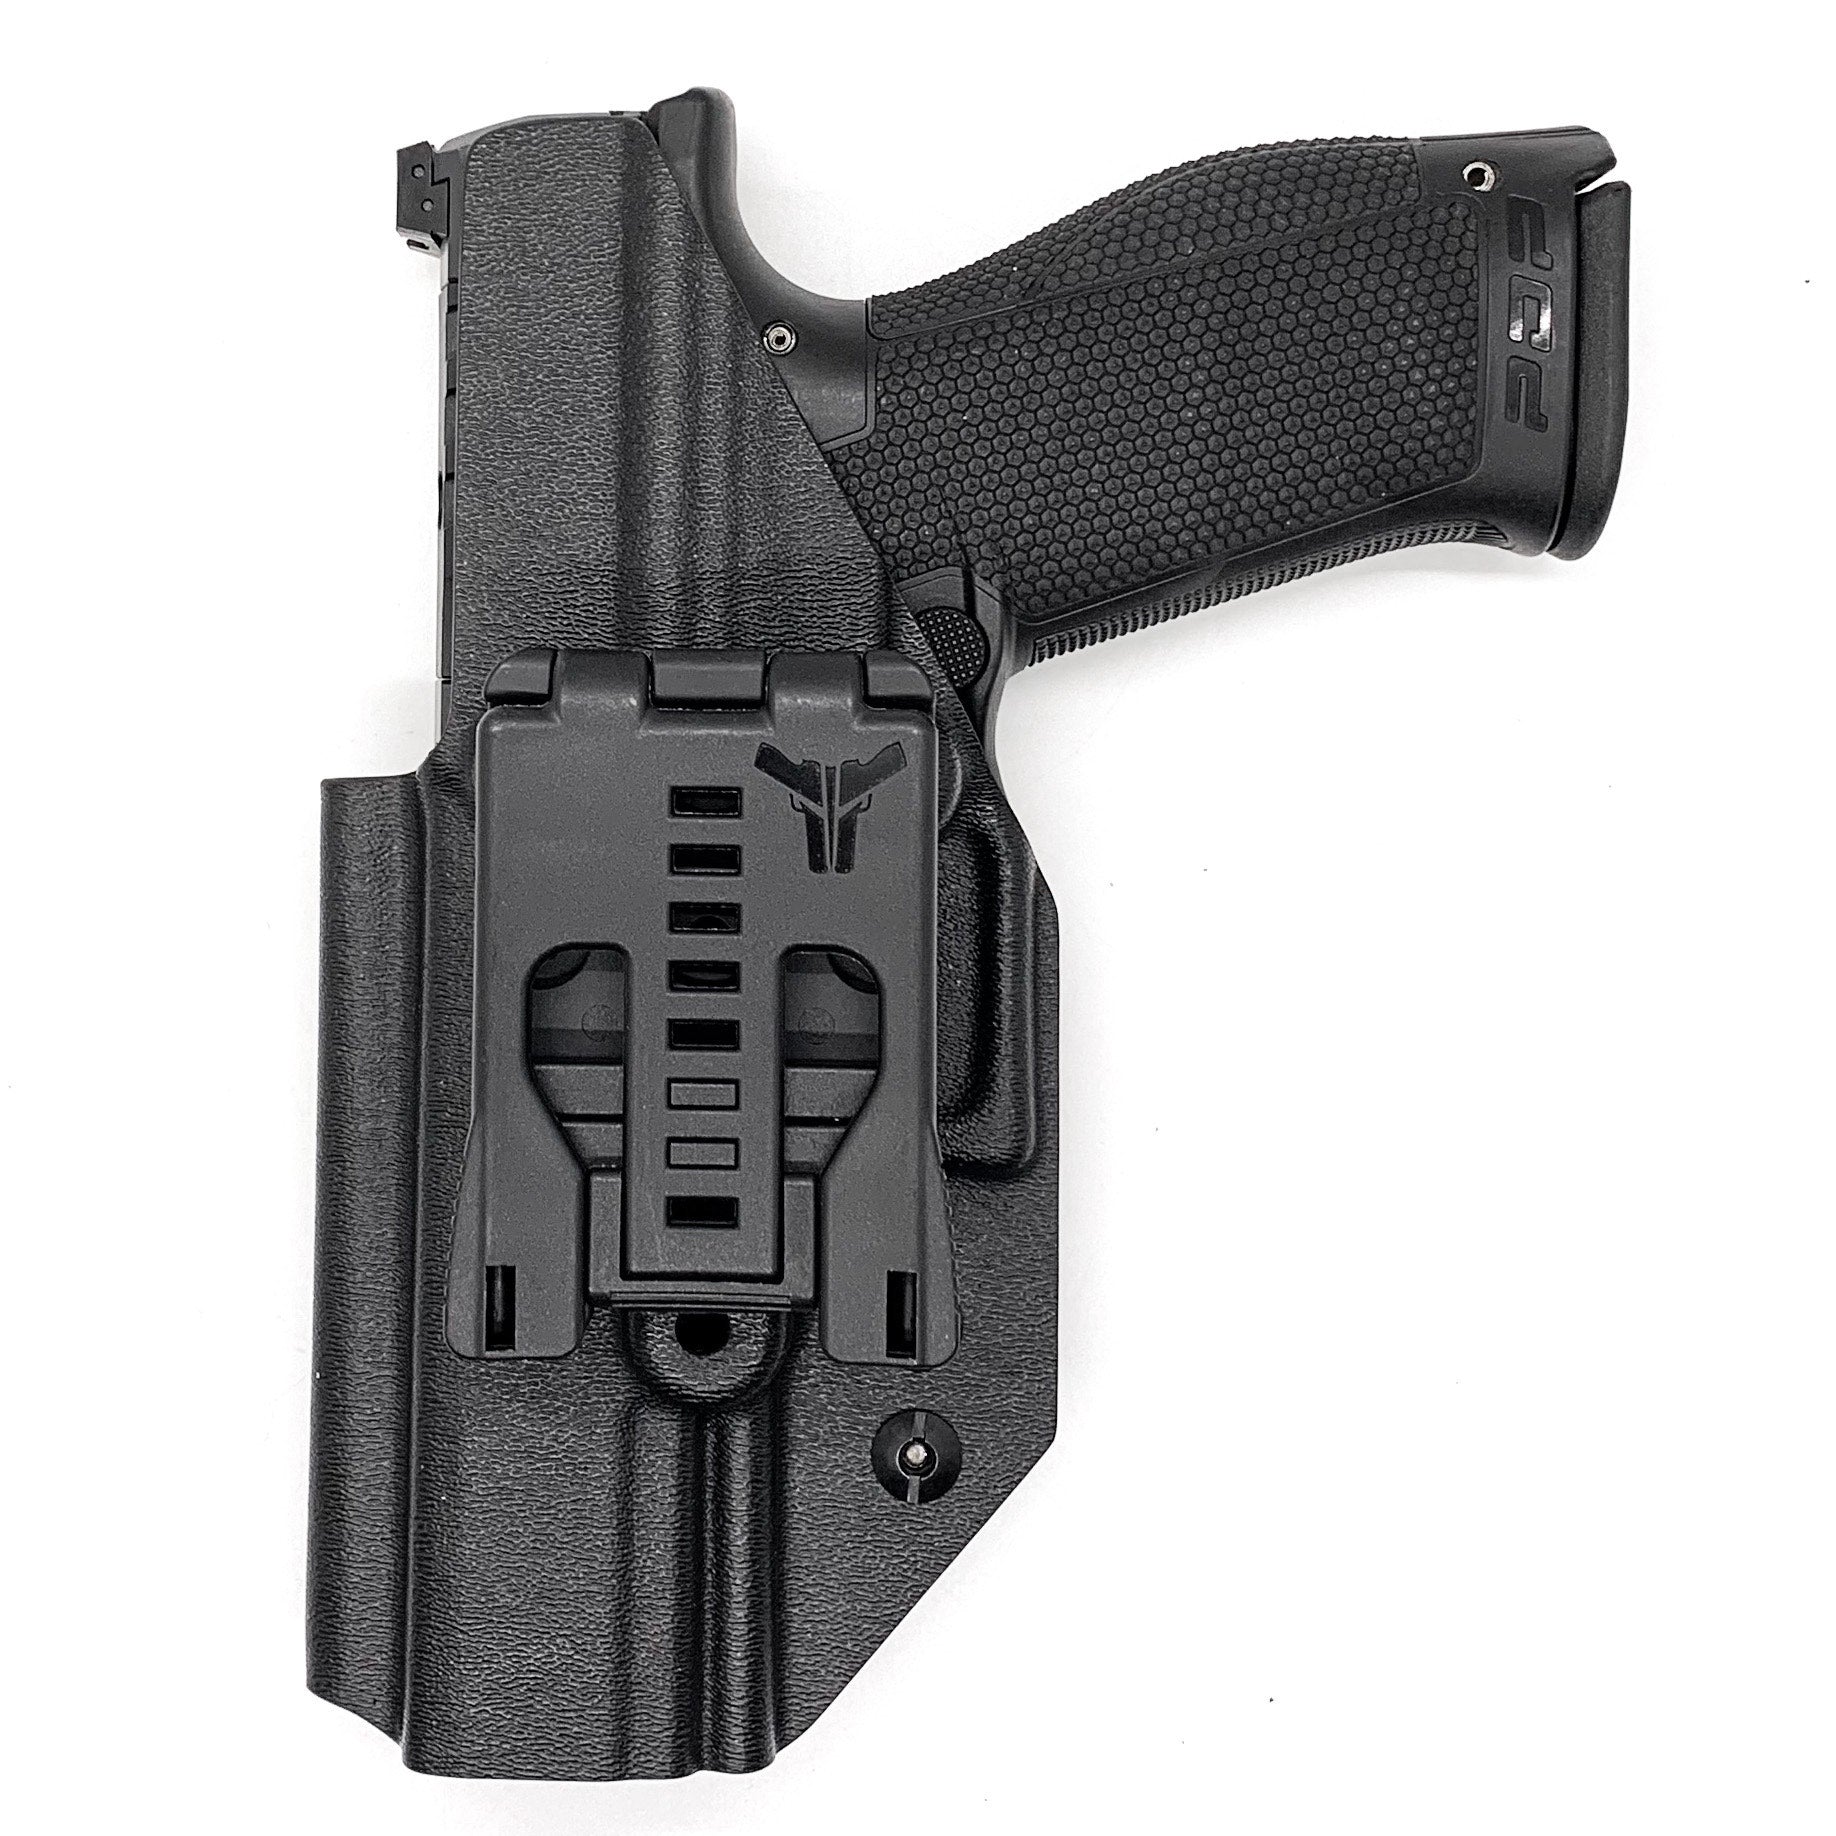 Outside Waistband Holster designed to fit the Walther PDP Full Size 4.5" pistol. Holster profile is cut to allow red dot sights to be mounted on the pistol.  This holster will fit the 4.5" Full Size, Full Size 4" and Compact. Full sweat guard, adjustable retention and open muzzle for threaded barrels and compensators.